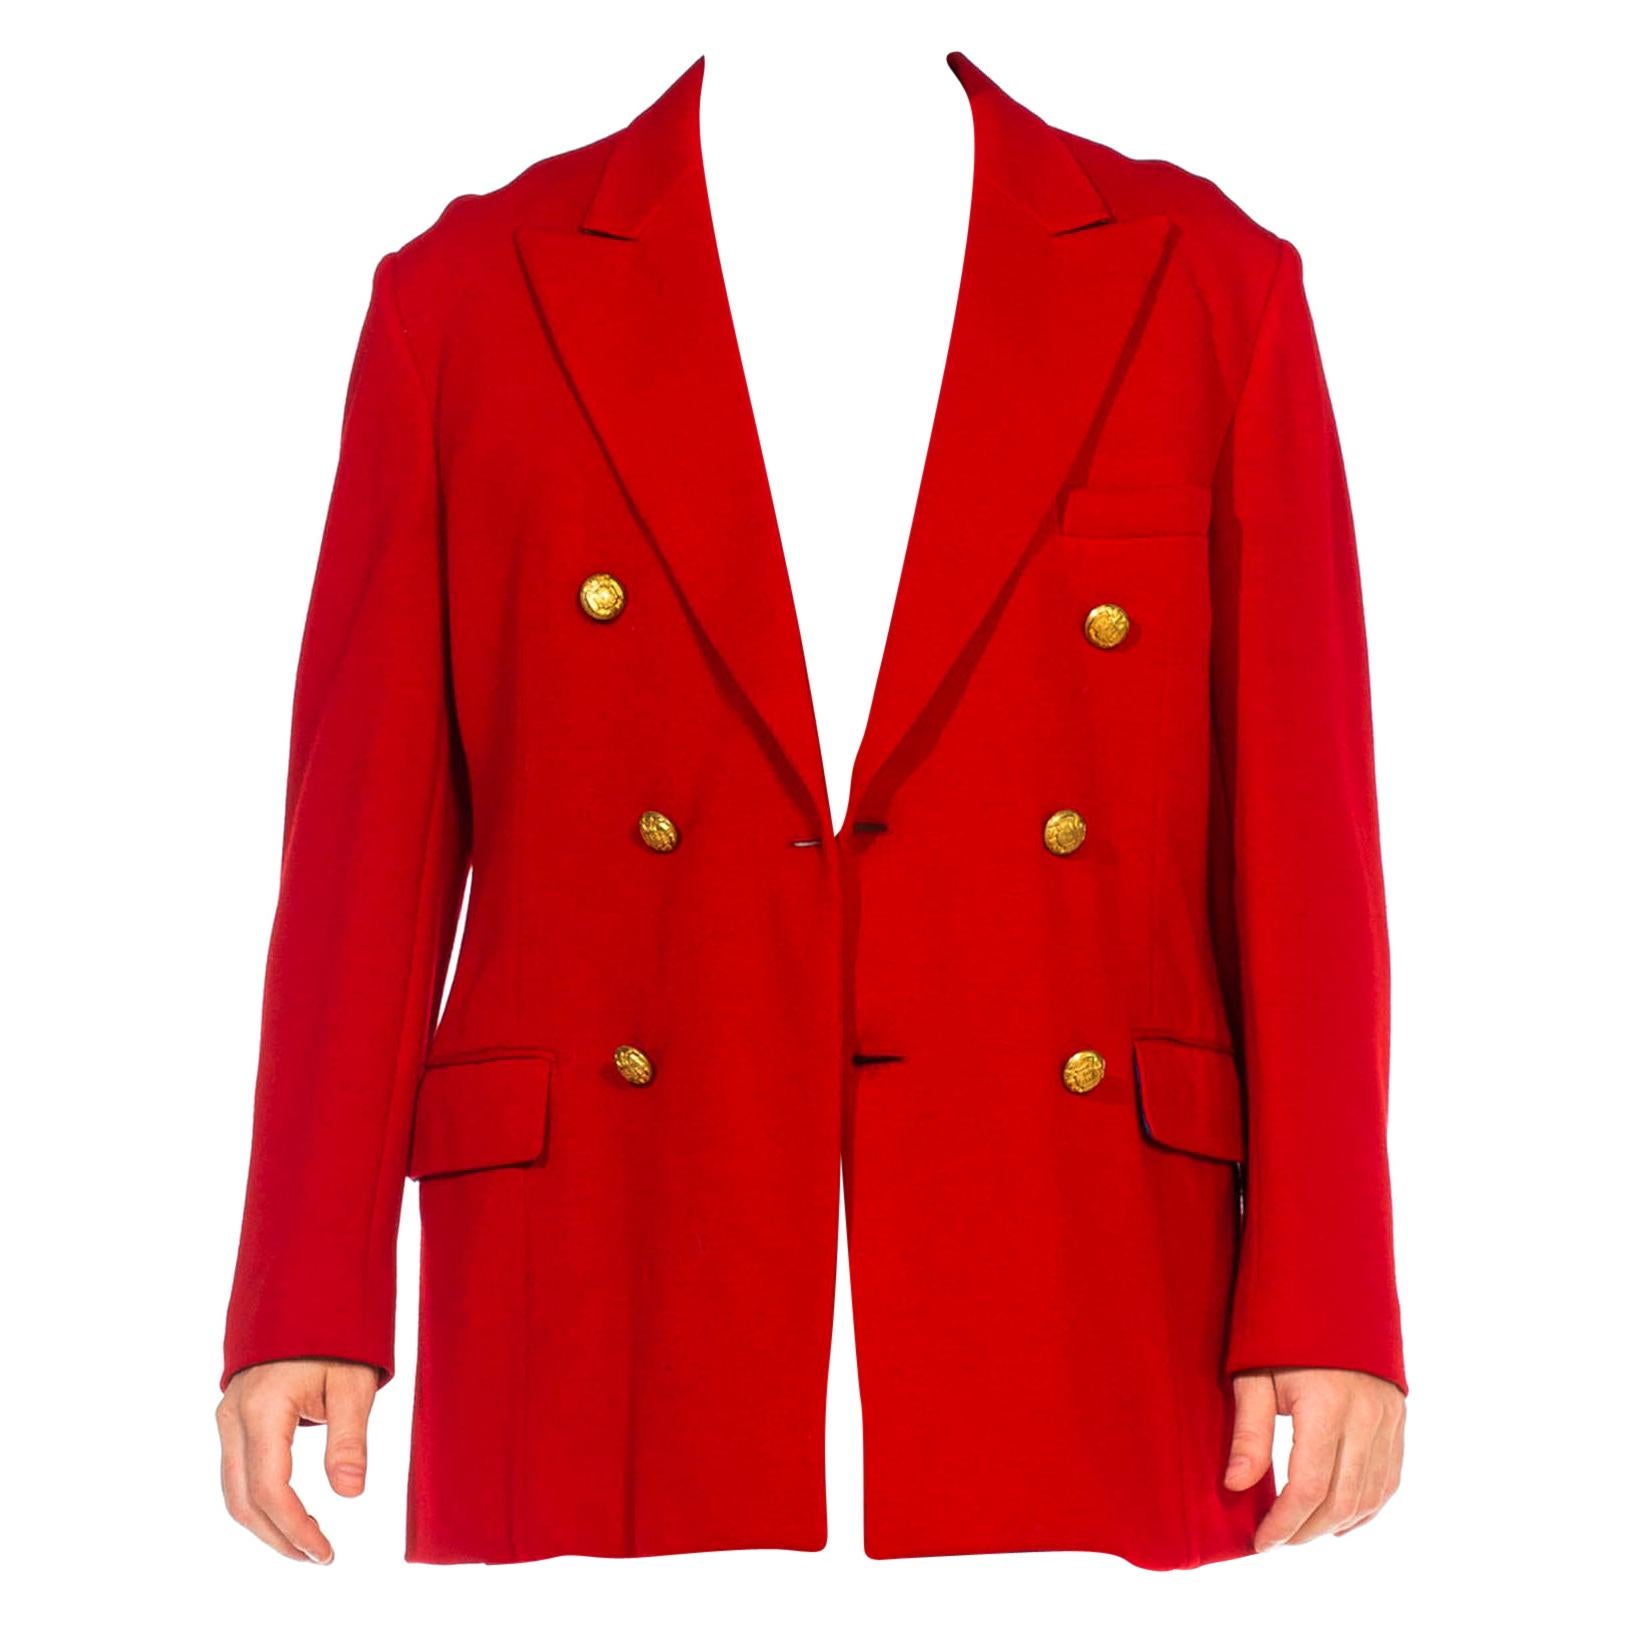 1960S Red Wool Jersey Double Breasted Peak Lapel Blazer  With Gold Heraldic But